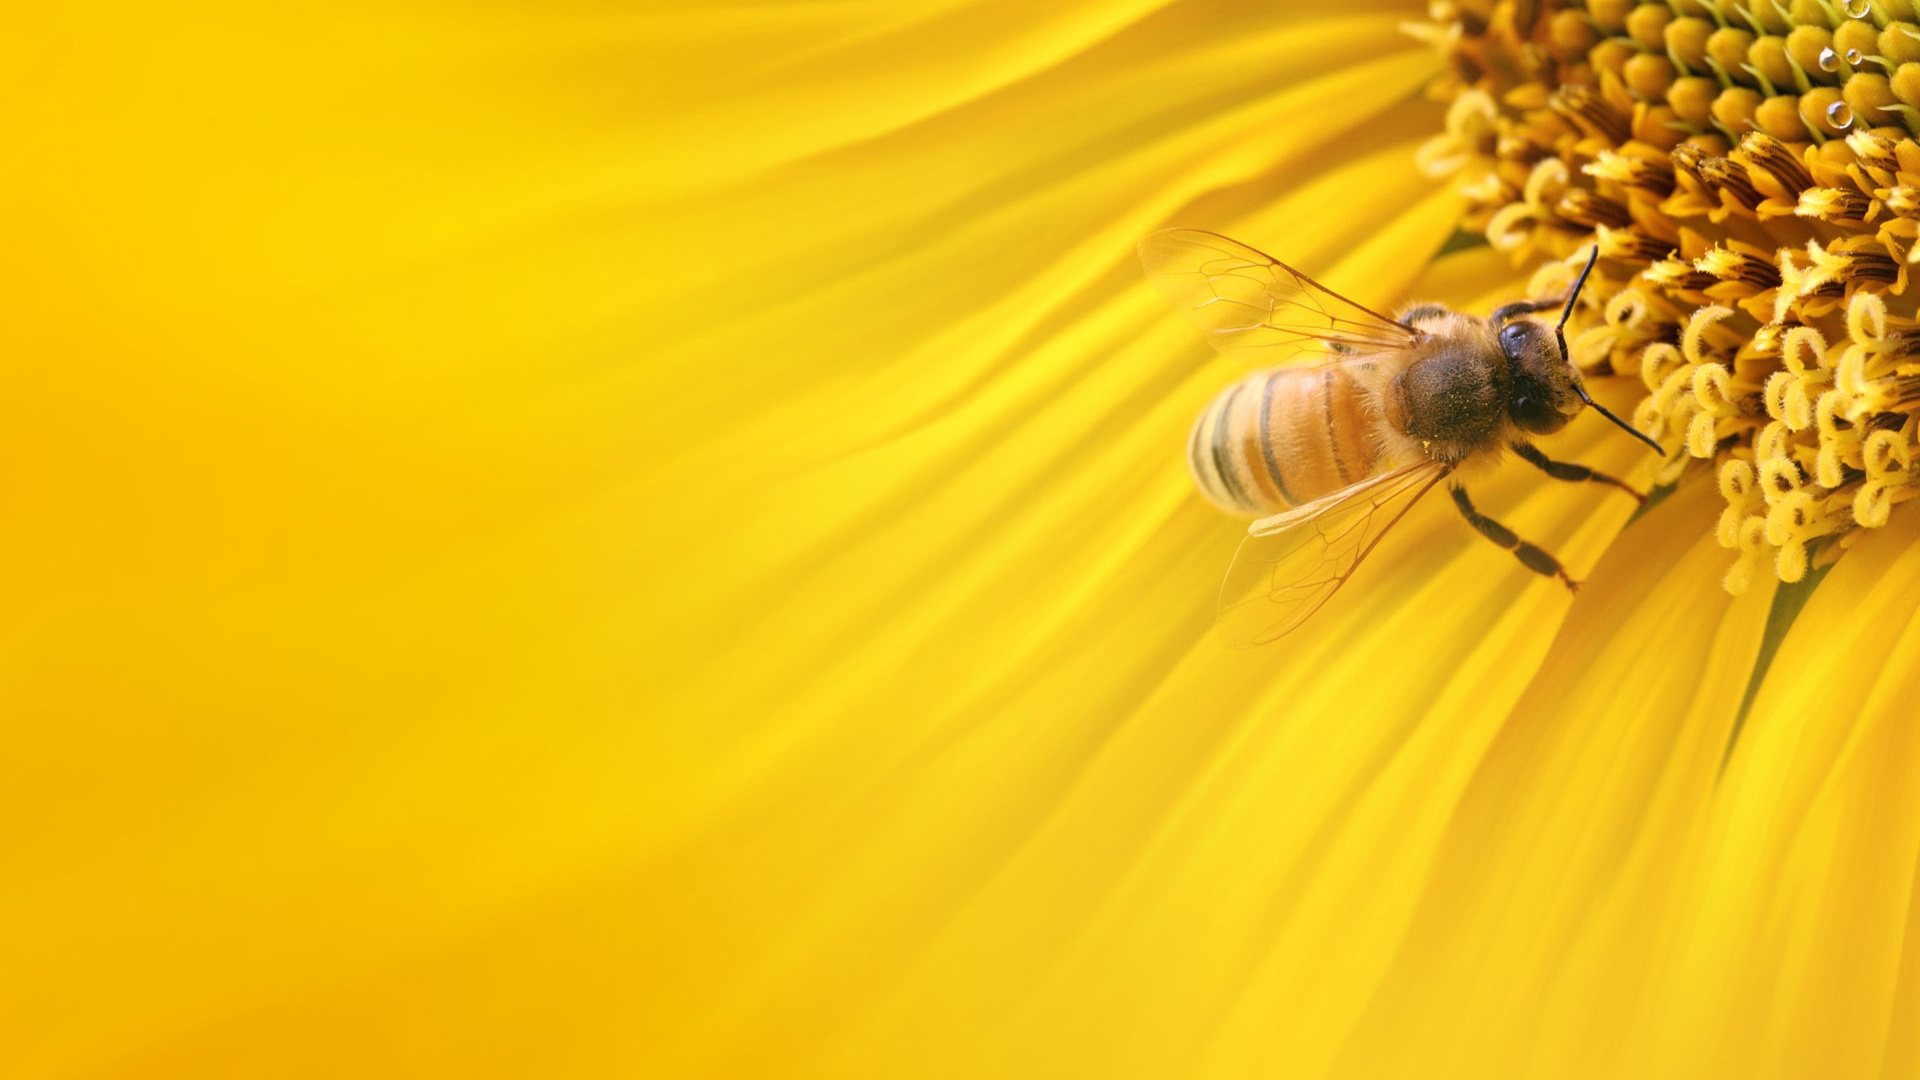 Brown Bee on Yellow Flower. Wallpaper in 1920x1080 Resolution